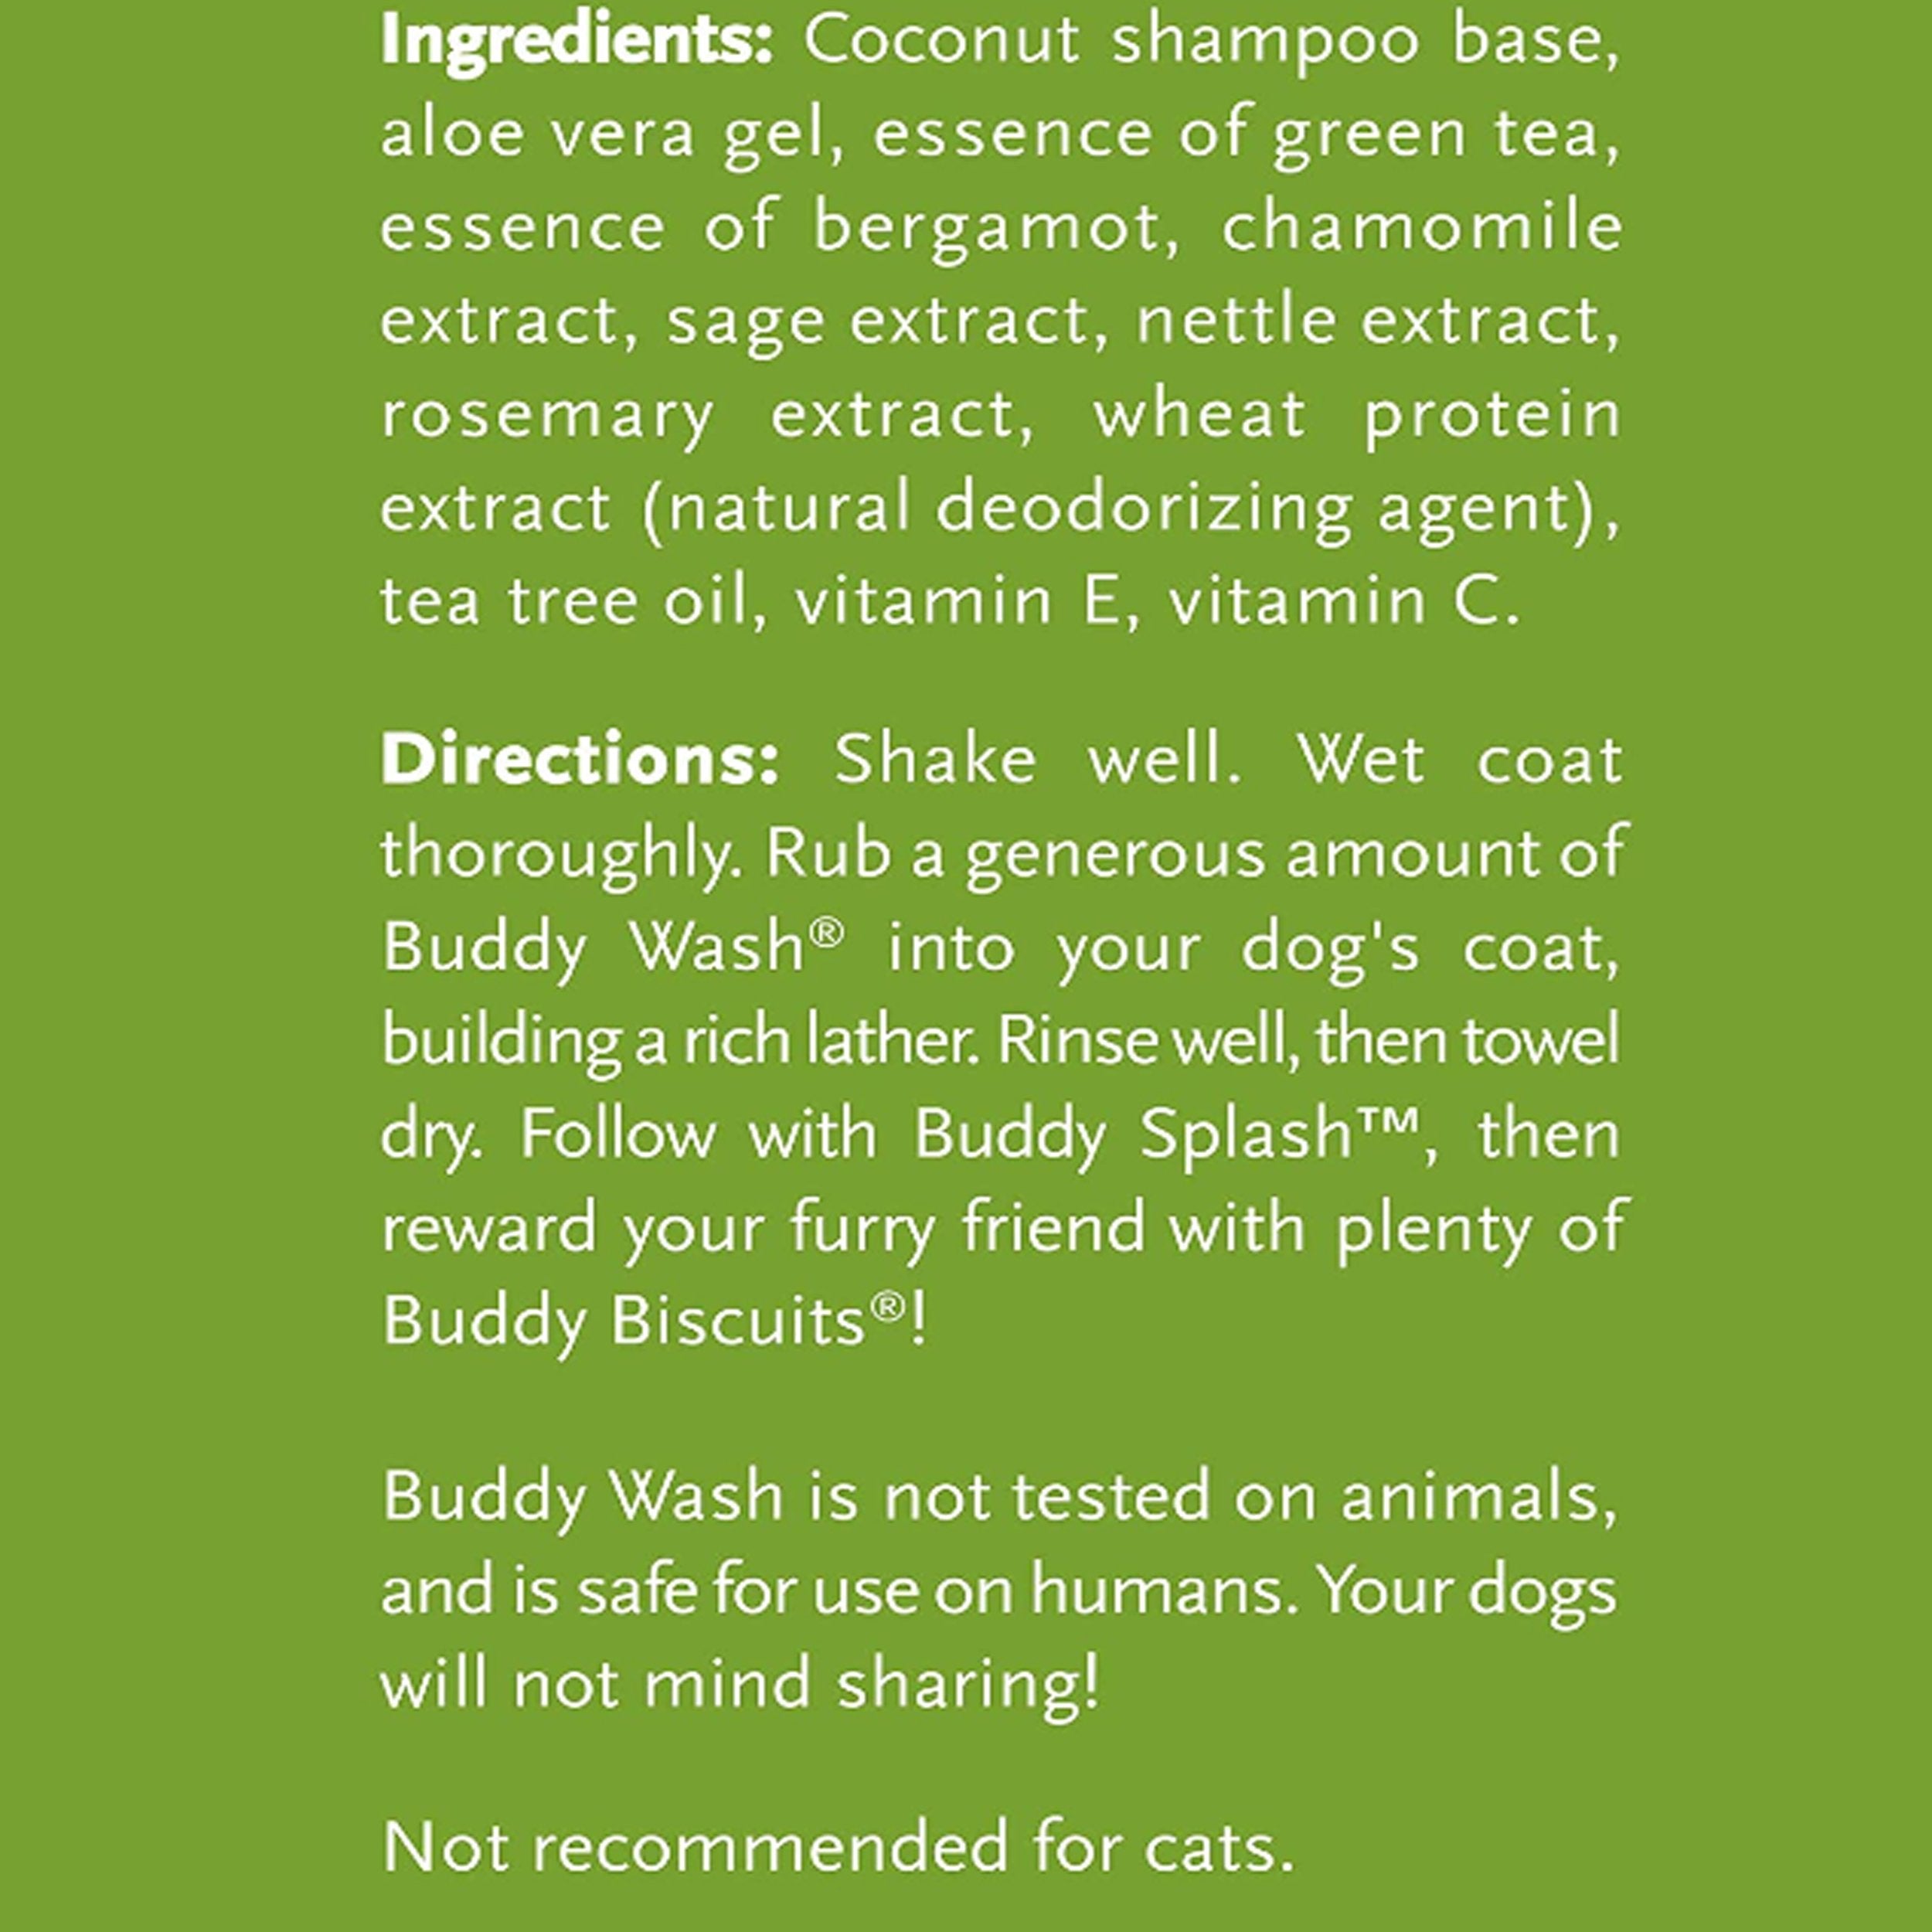 Buddy Wash Relaxing Bergamot 2in1 Shampoo and Conditioner 16 fl oz for dogs Fresh and Clean Coat Softener Description Specially Formulated to Clean and Moisturize dogs coat and creates soothing bath experience and calming scent Ingredients and Directions Detailed 